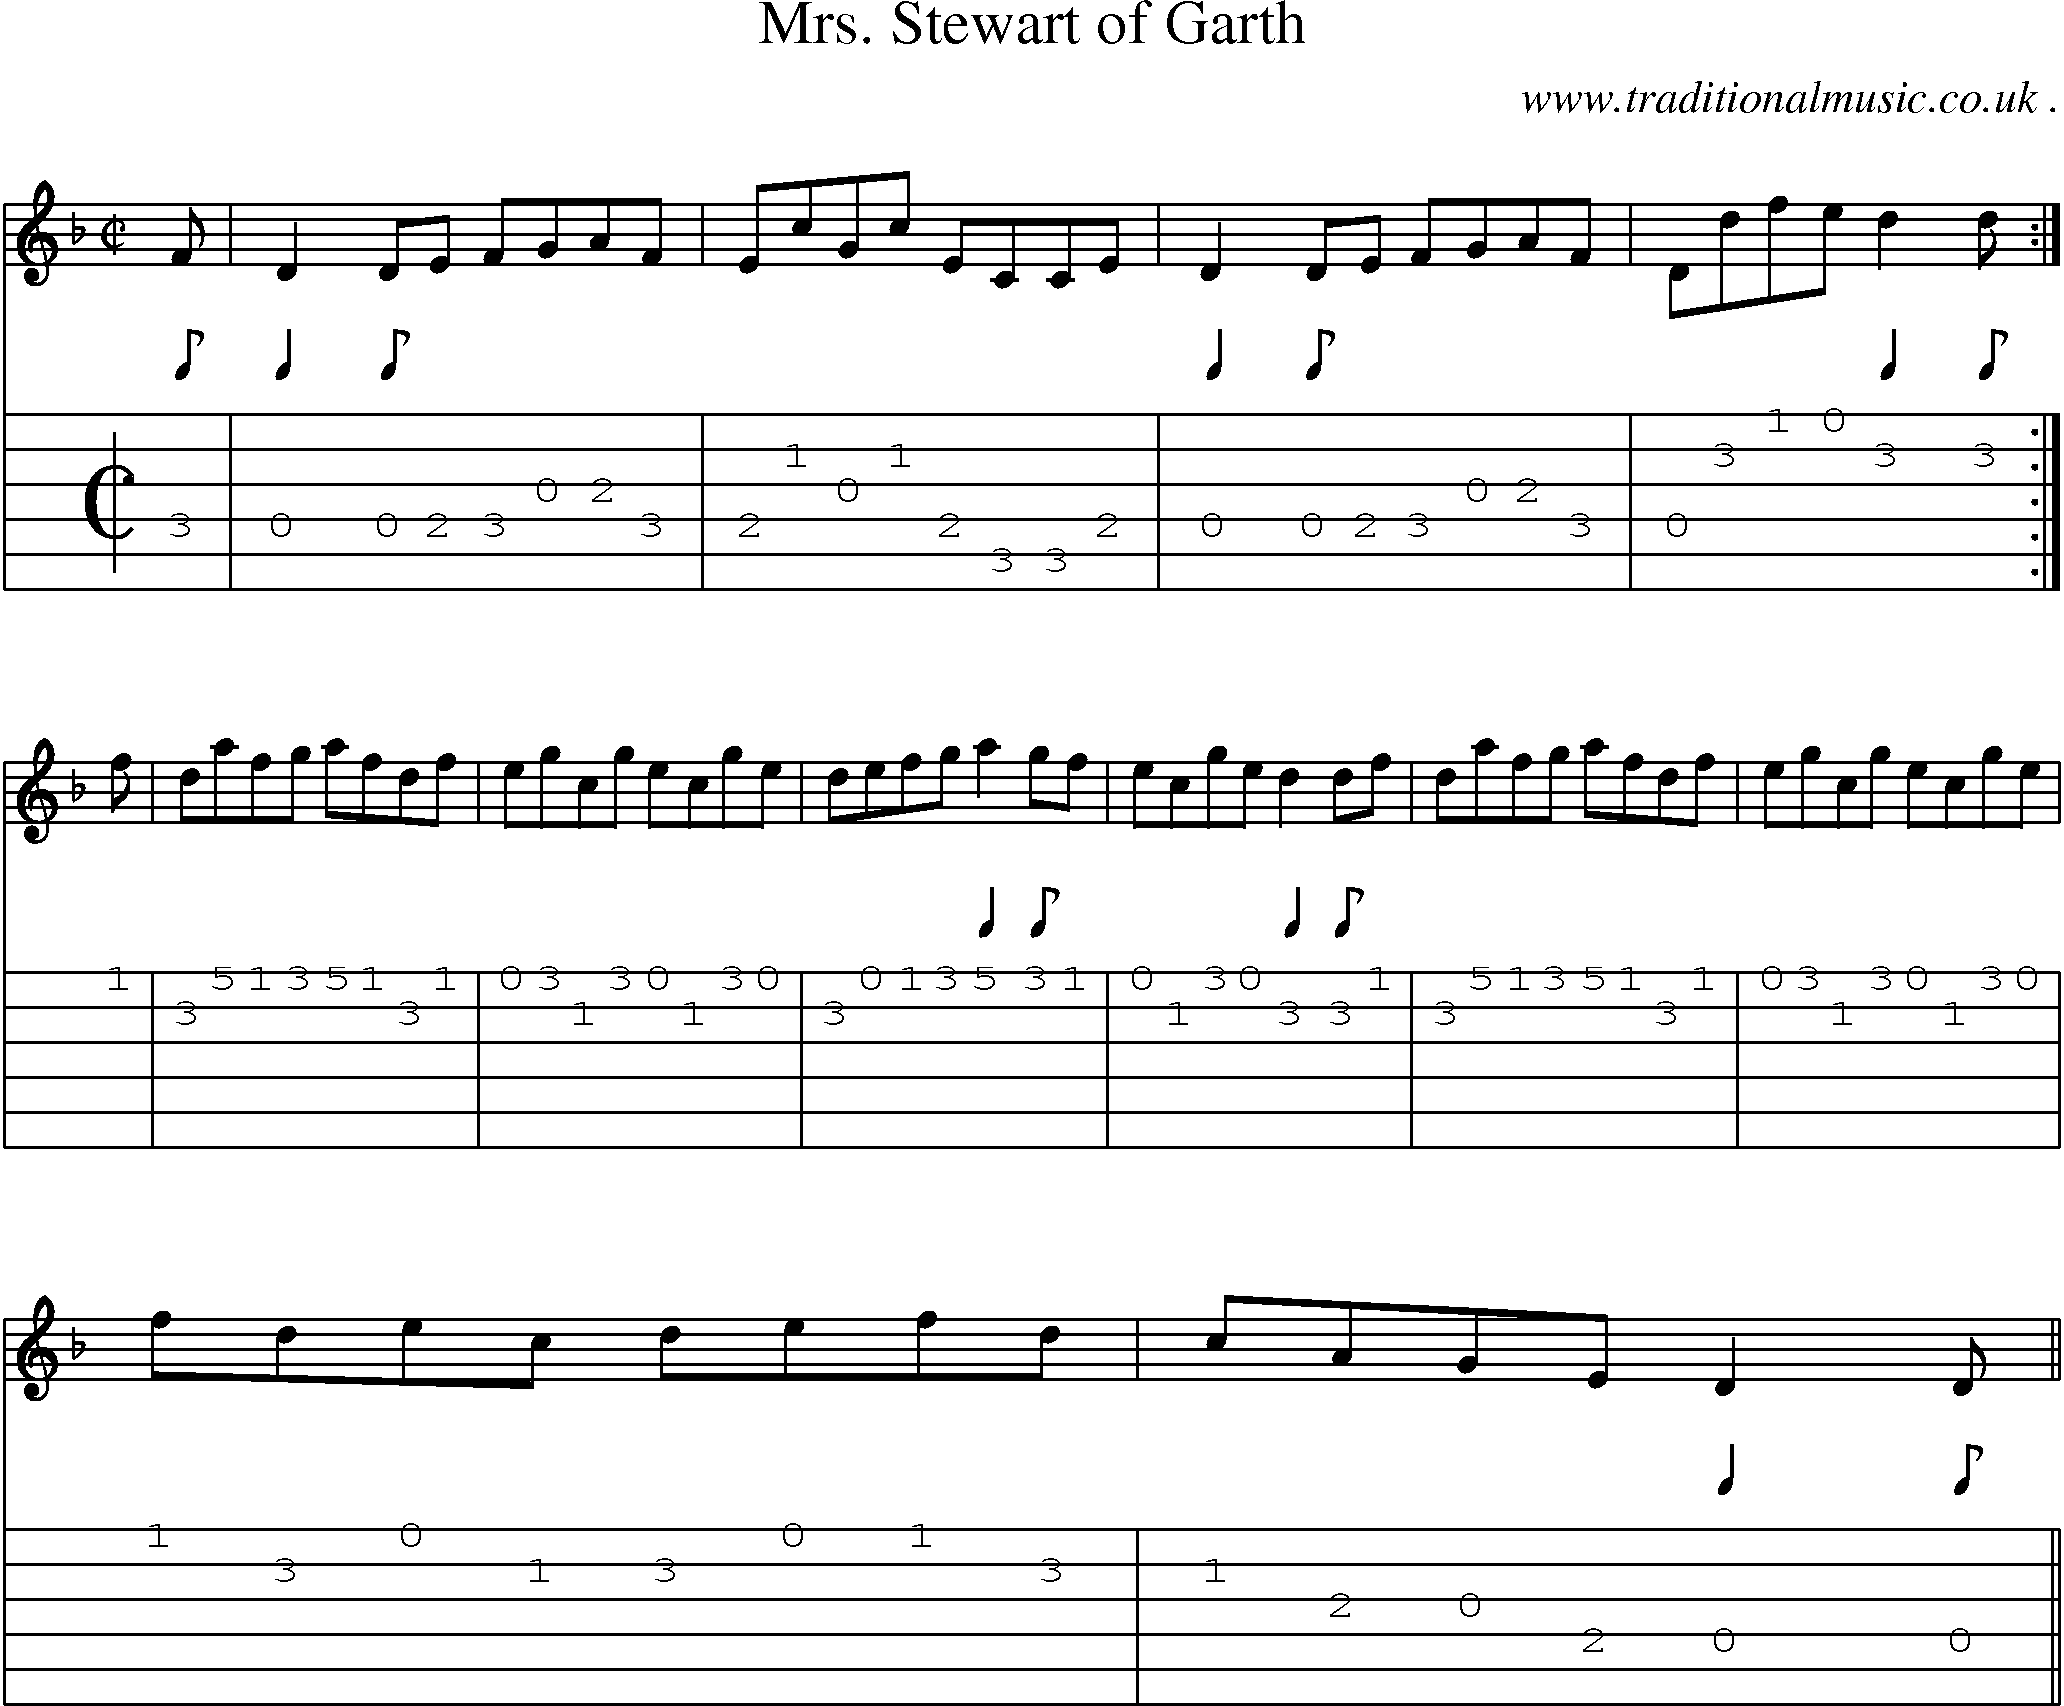 Sheet-music  score, Chords and Guitar Tabs for Mrs Stewart Of Garth